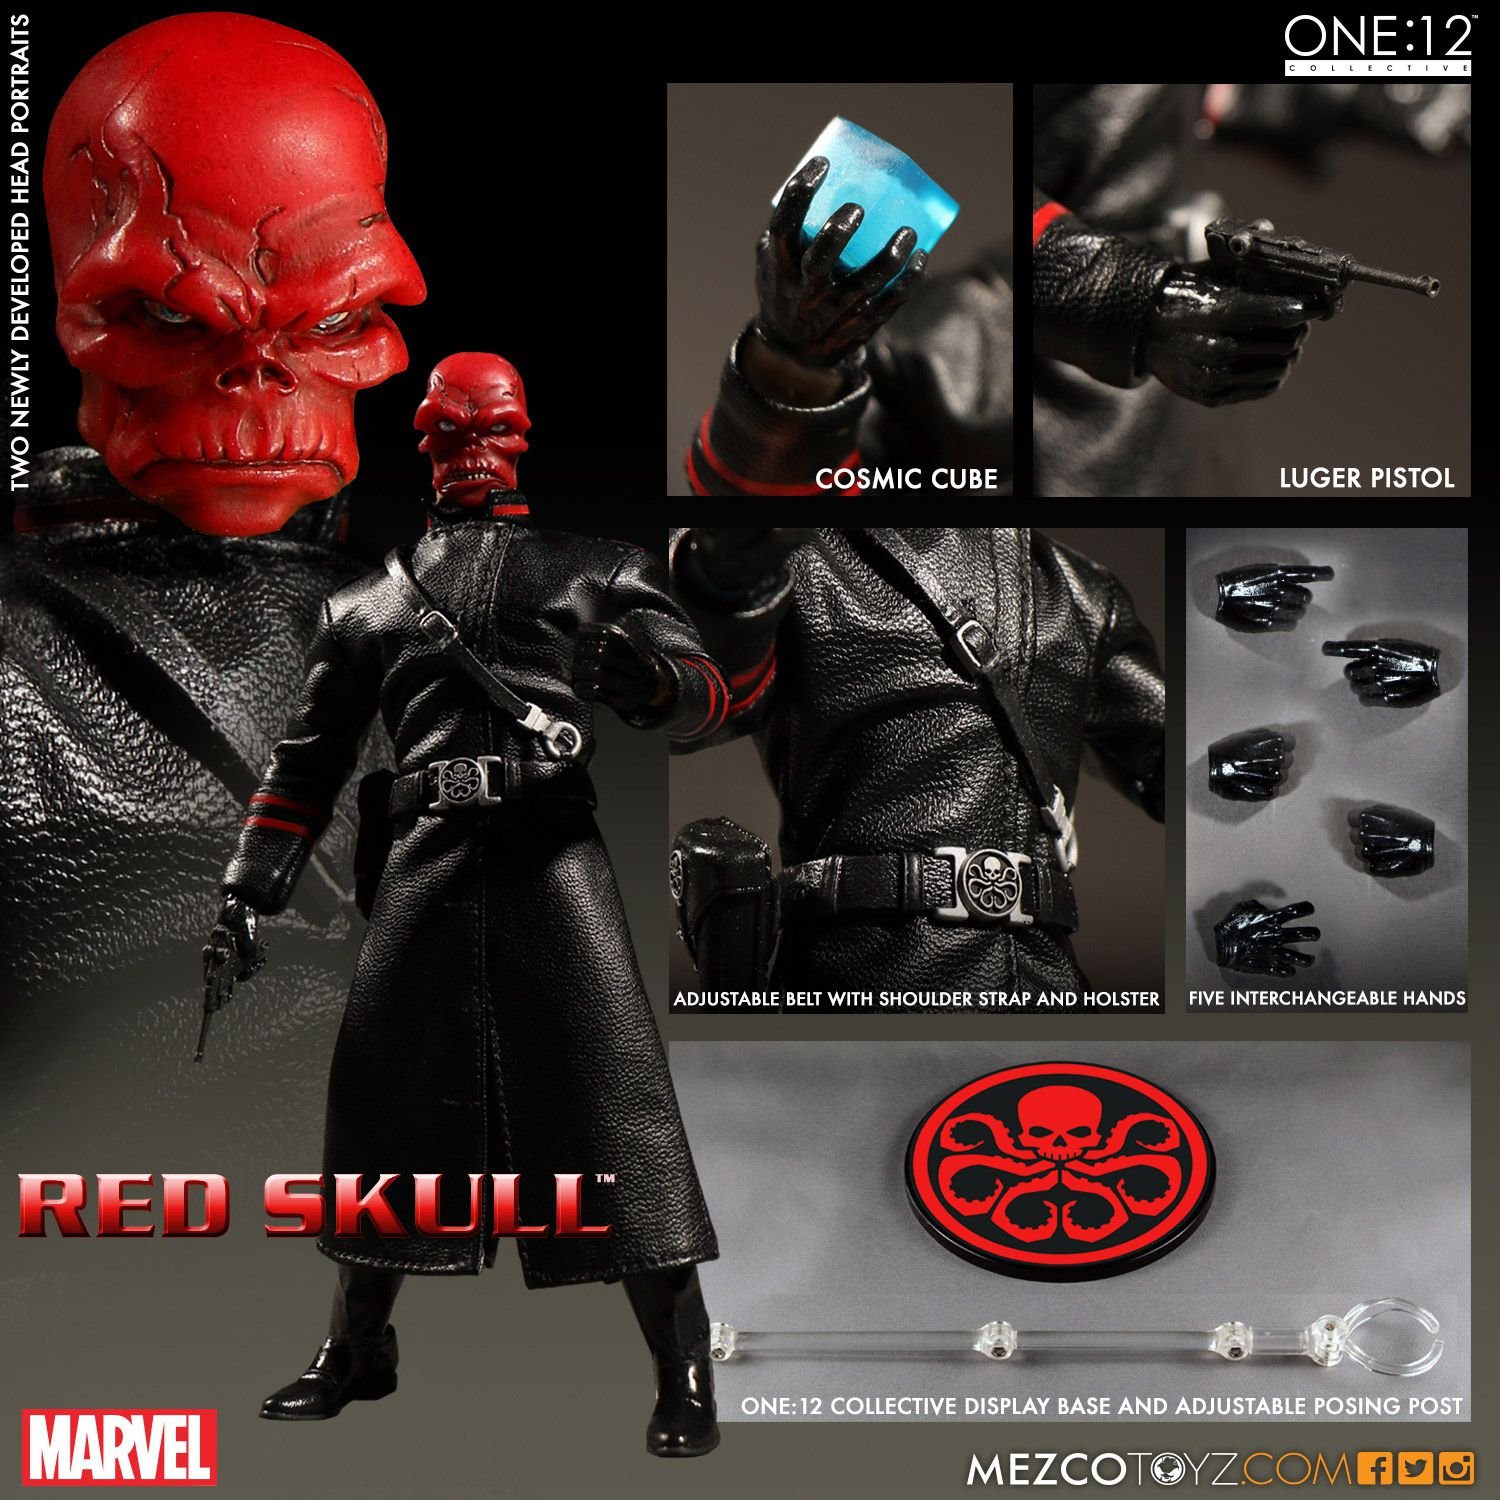 MARVEL BRAND NEW 6in Action Figure AUTHENTIC MEZCO One:12 Collective Red Skull